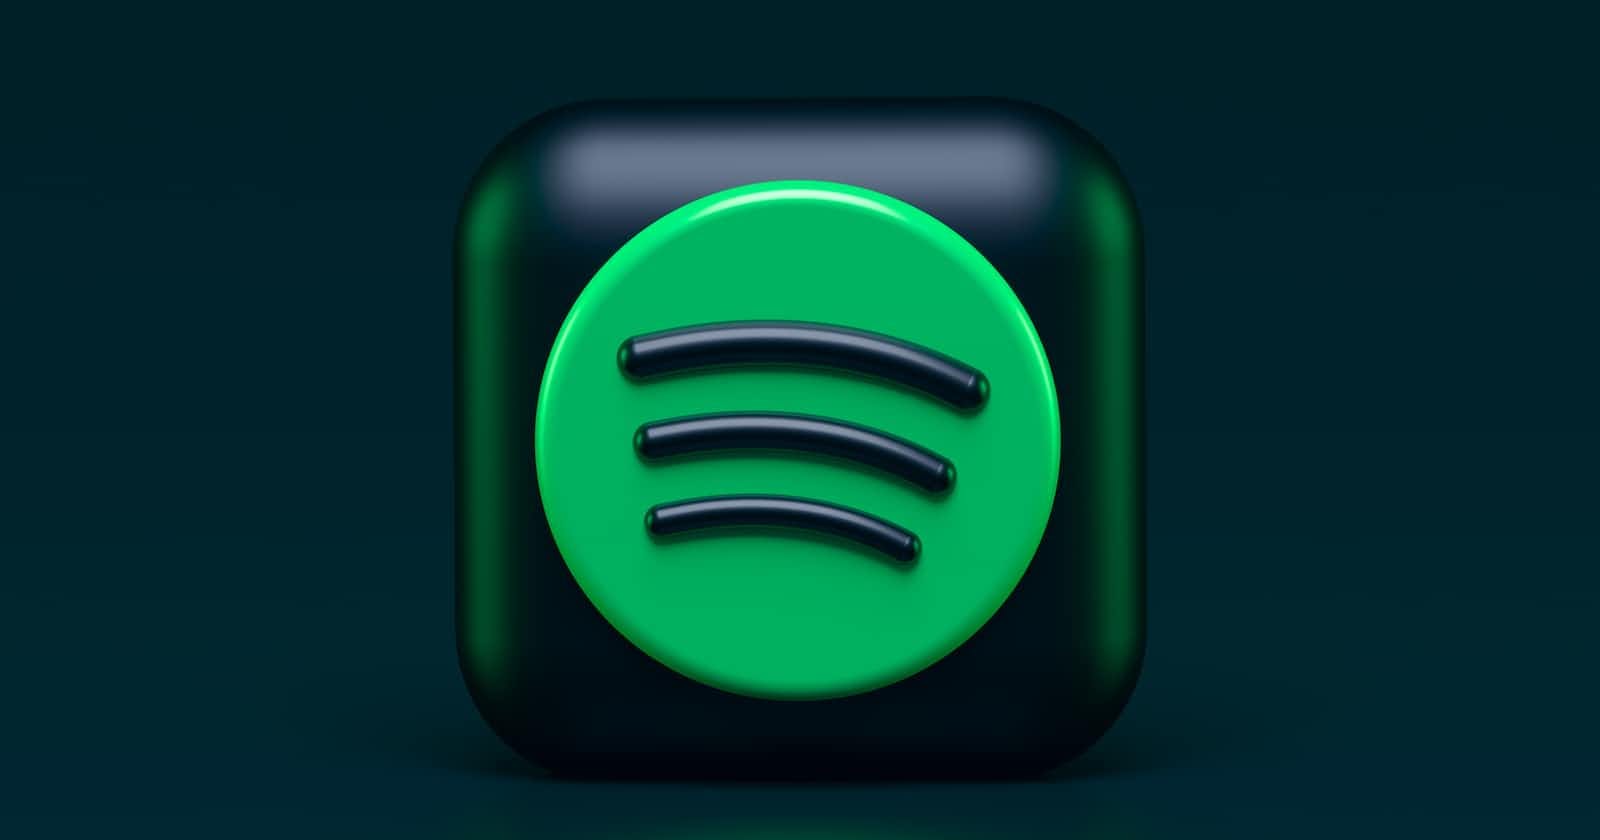 How to get the Spotify Refresh Token